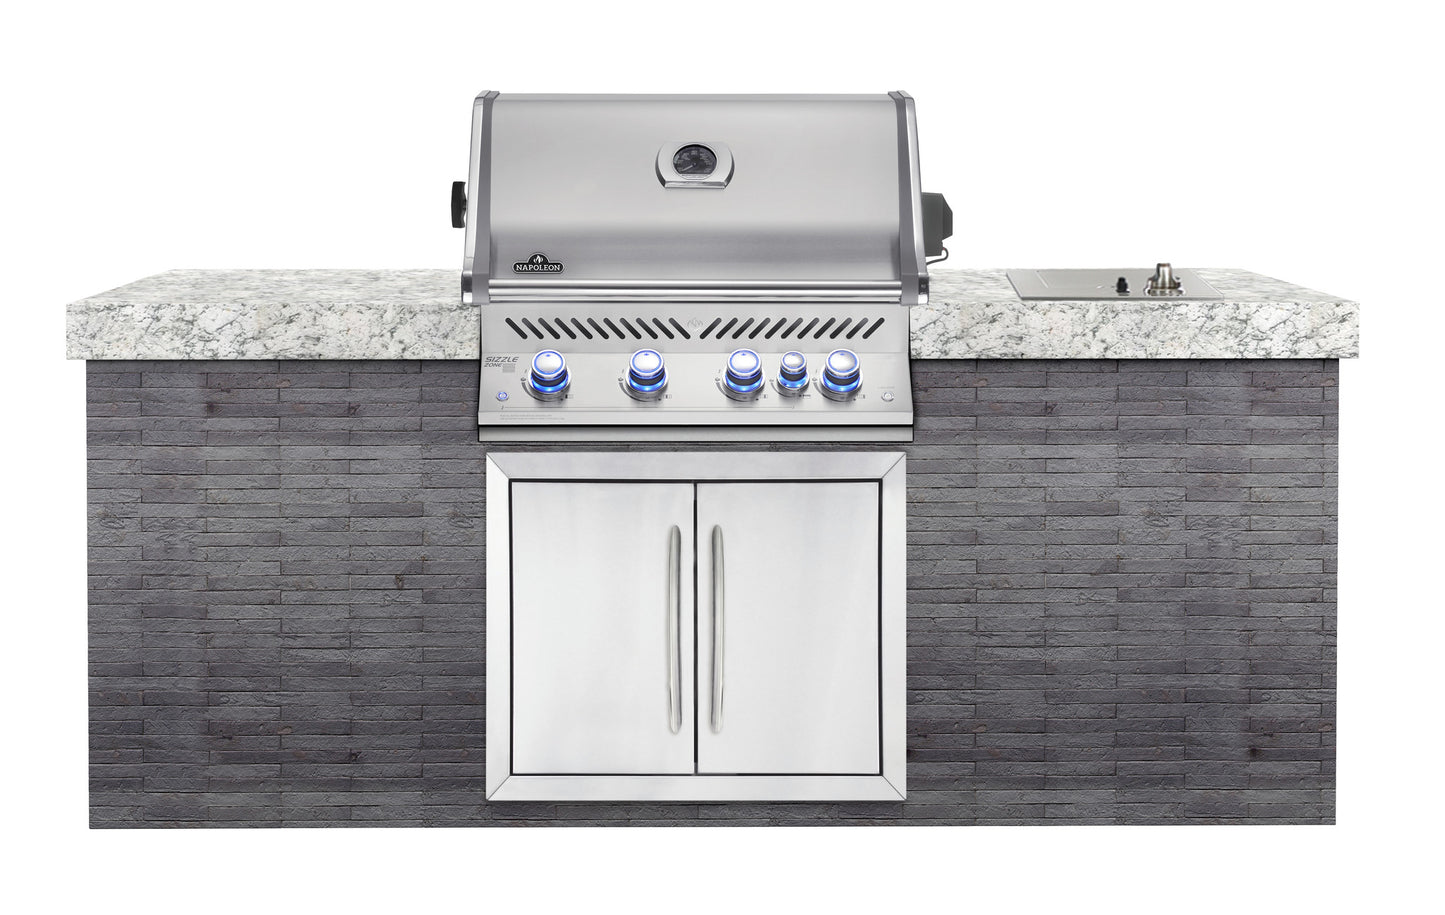 NAPOLEON PRESTIGE BIPRO500RB | The PRO series are made as well as any BBQ available, and it'll be sure to keep you happy all summer long | Barbecues Galore: Burlington, Oakville, Etobicoke & Calgary